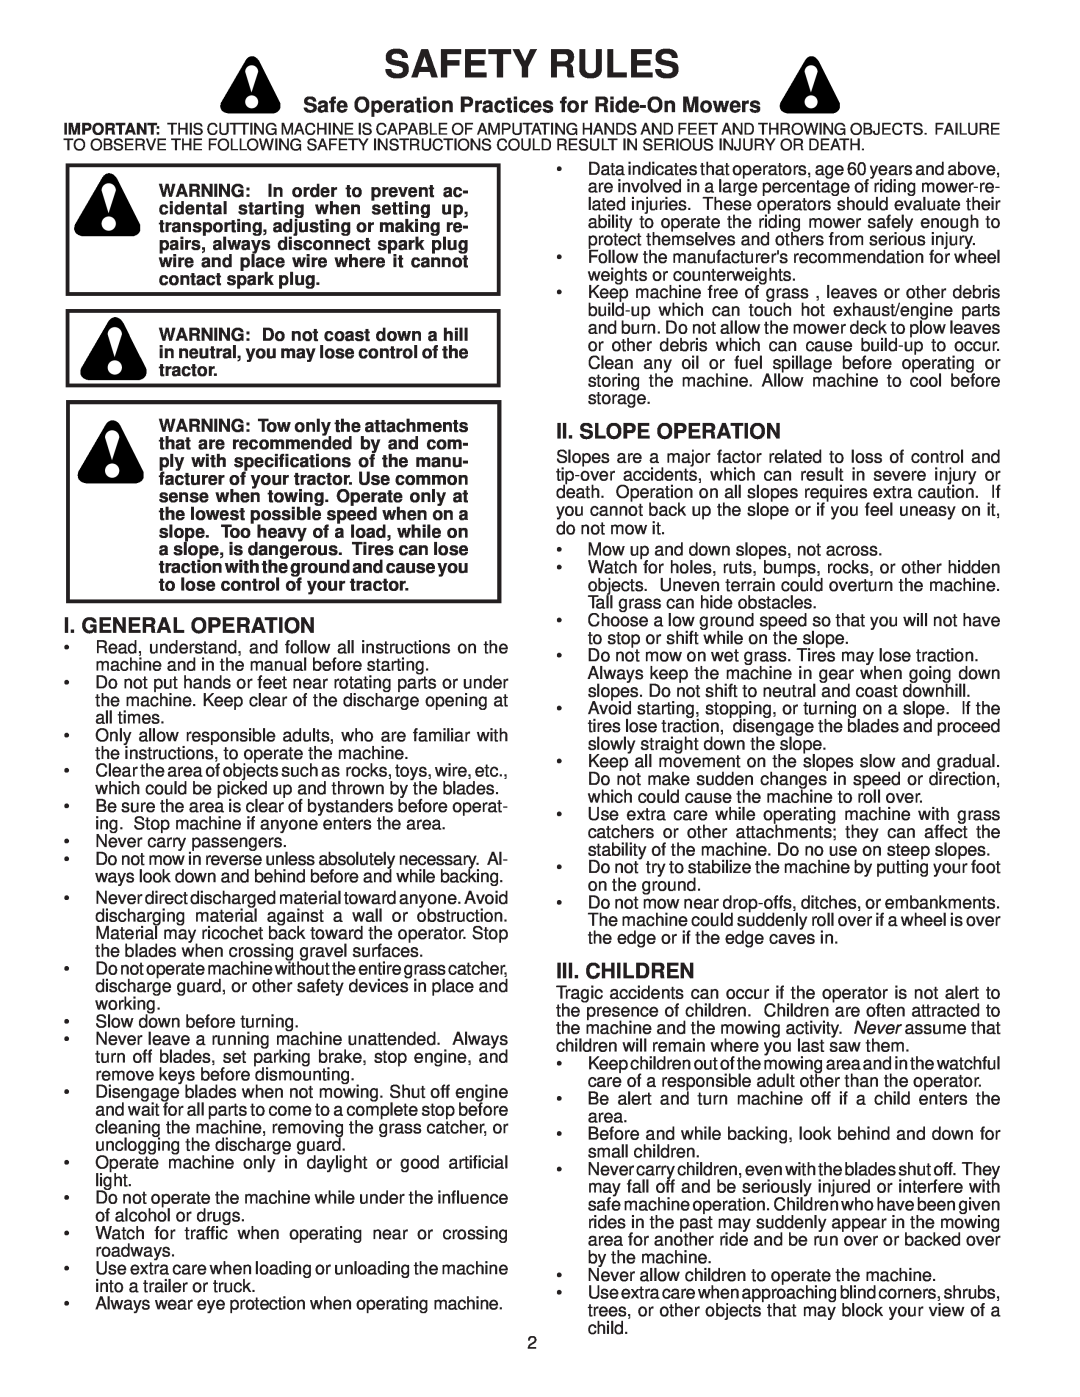 McCulloch 960 71 00-23 Safety Rules, Safe Operation Practices for Ride-OnMowers, I. General Operation, Ii. Slope Operation 